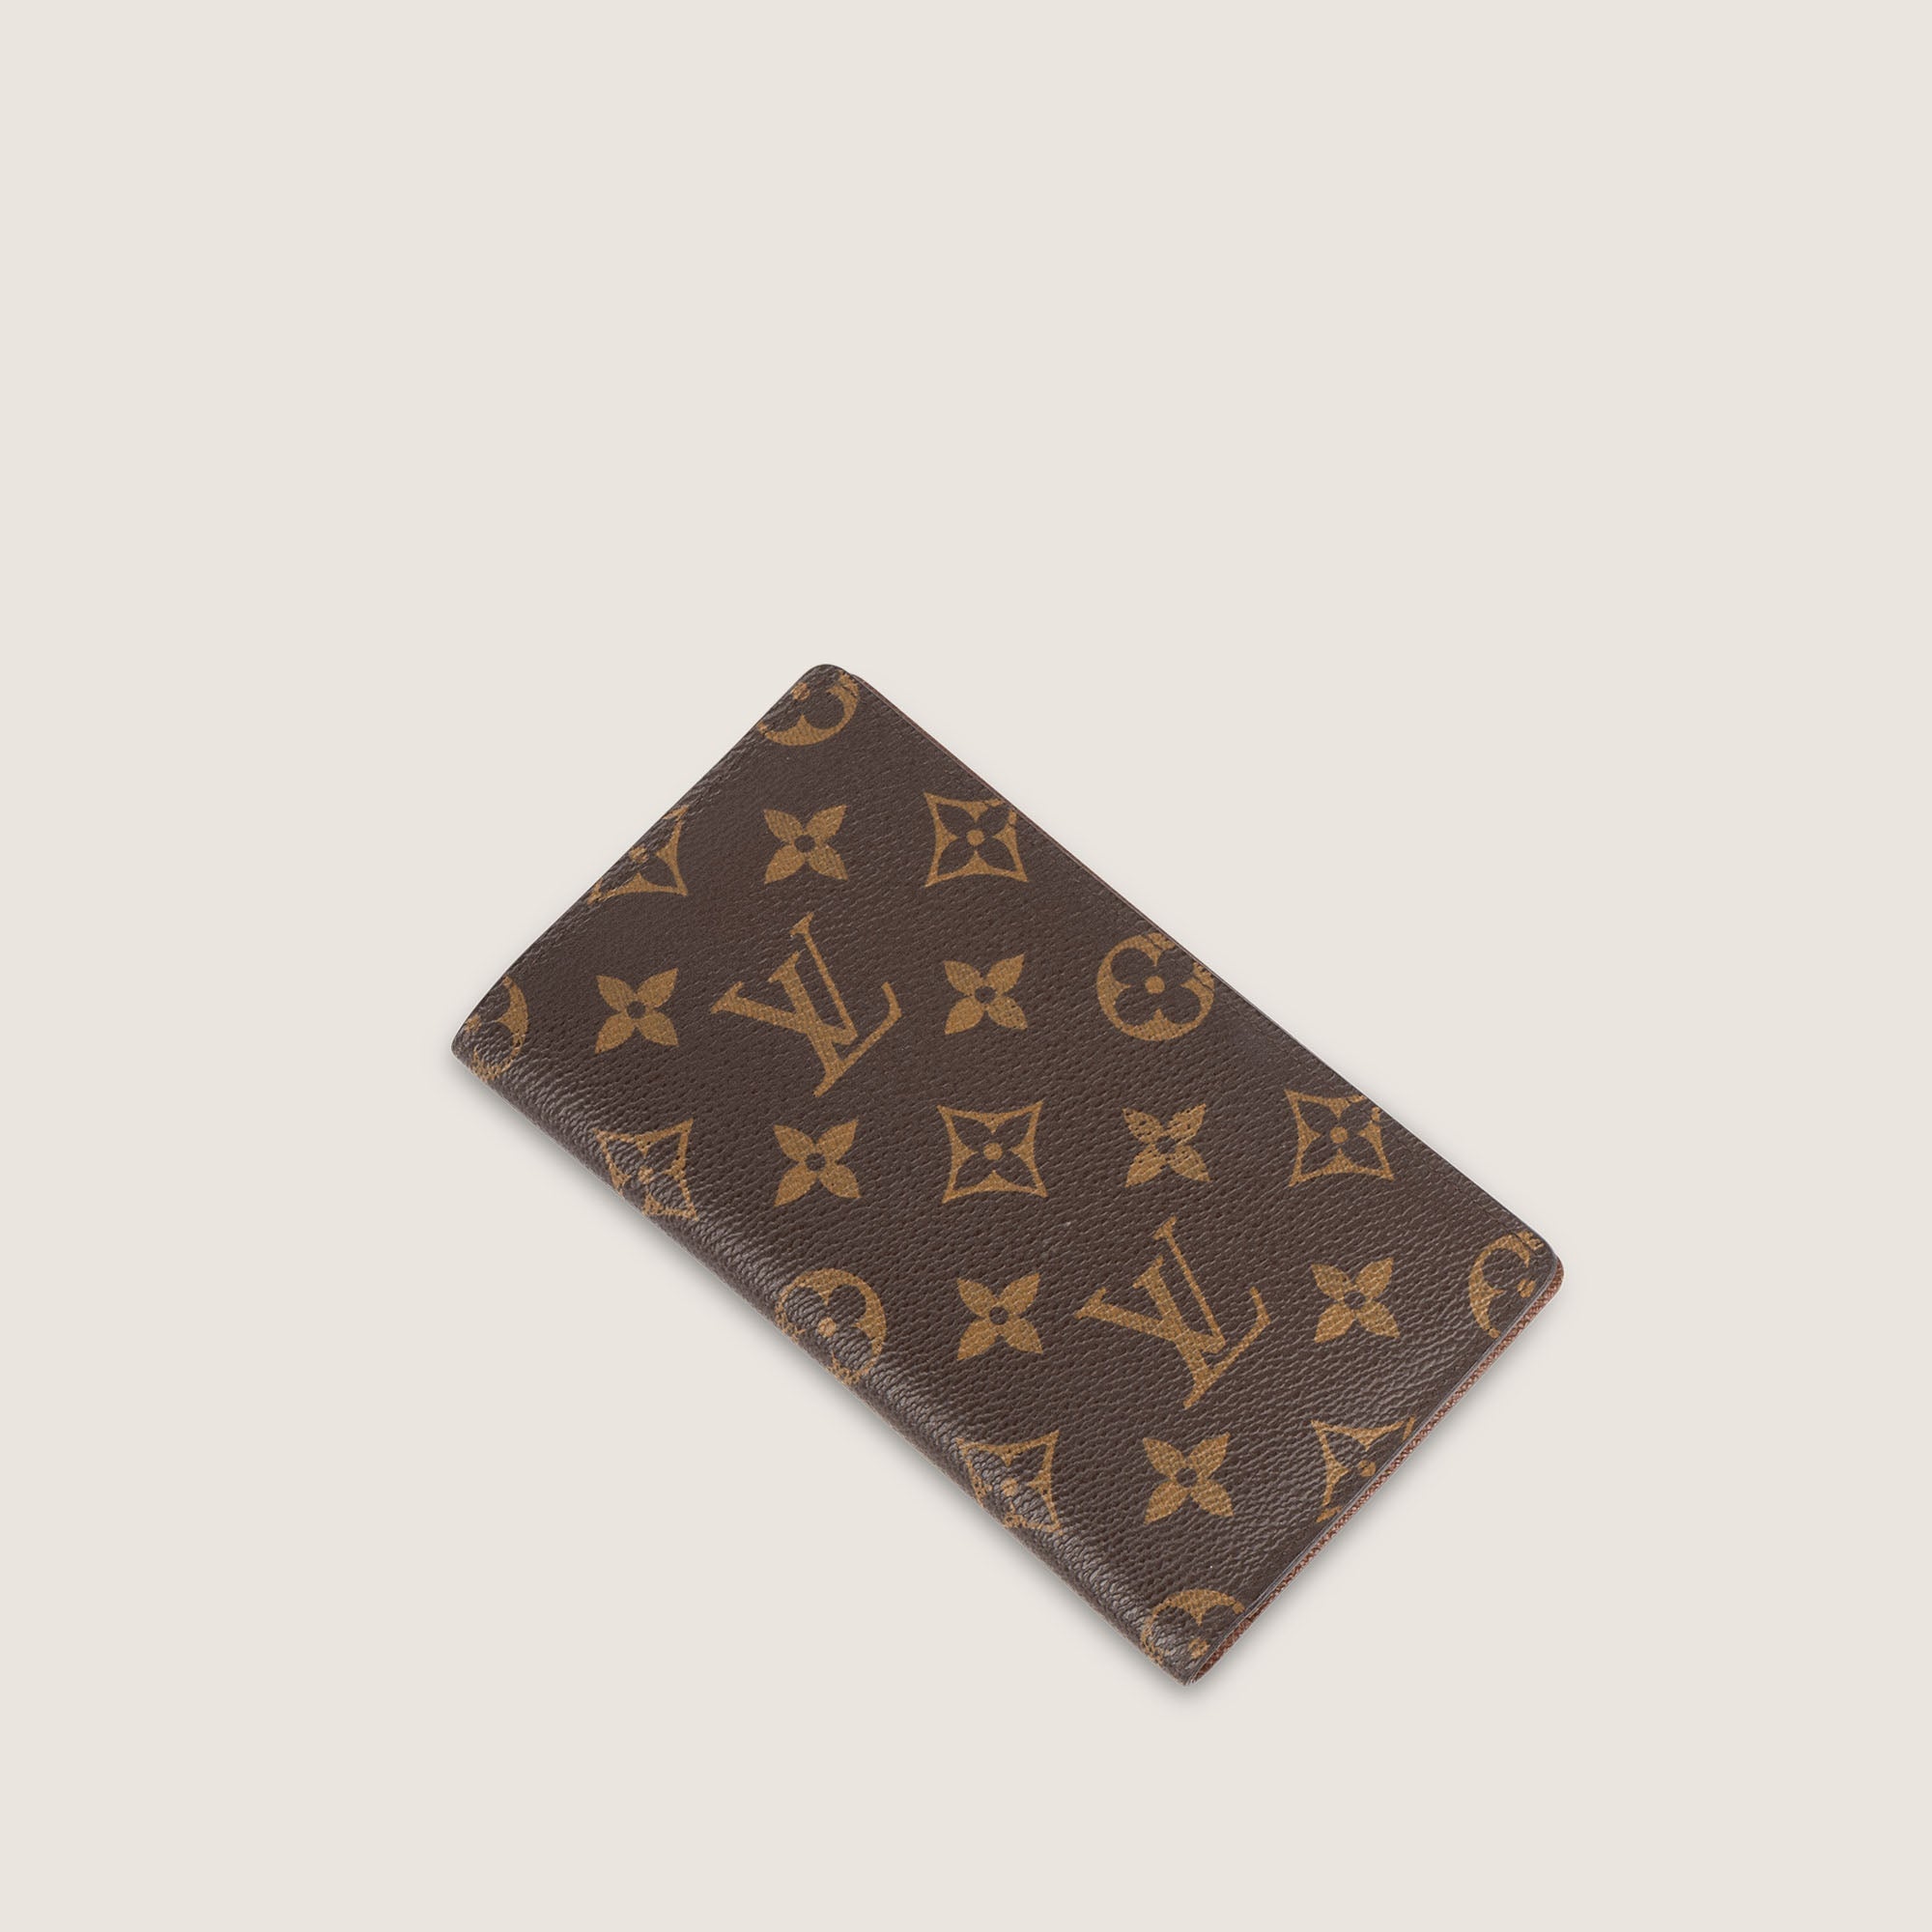 Pocket Agenda Cover - LOUIS VUITTON - Affordable Luxury image